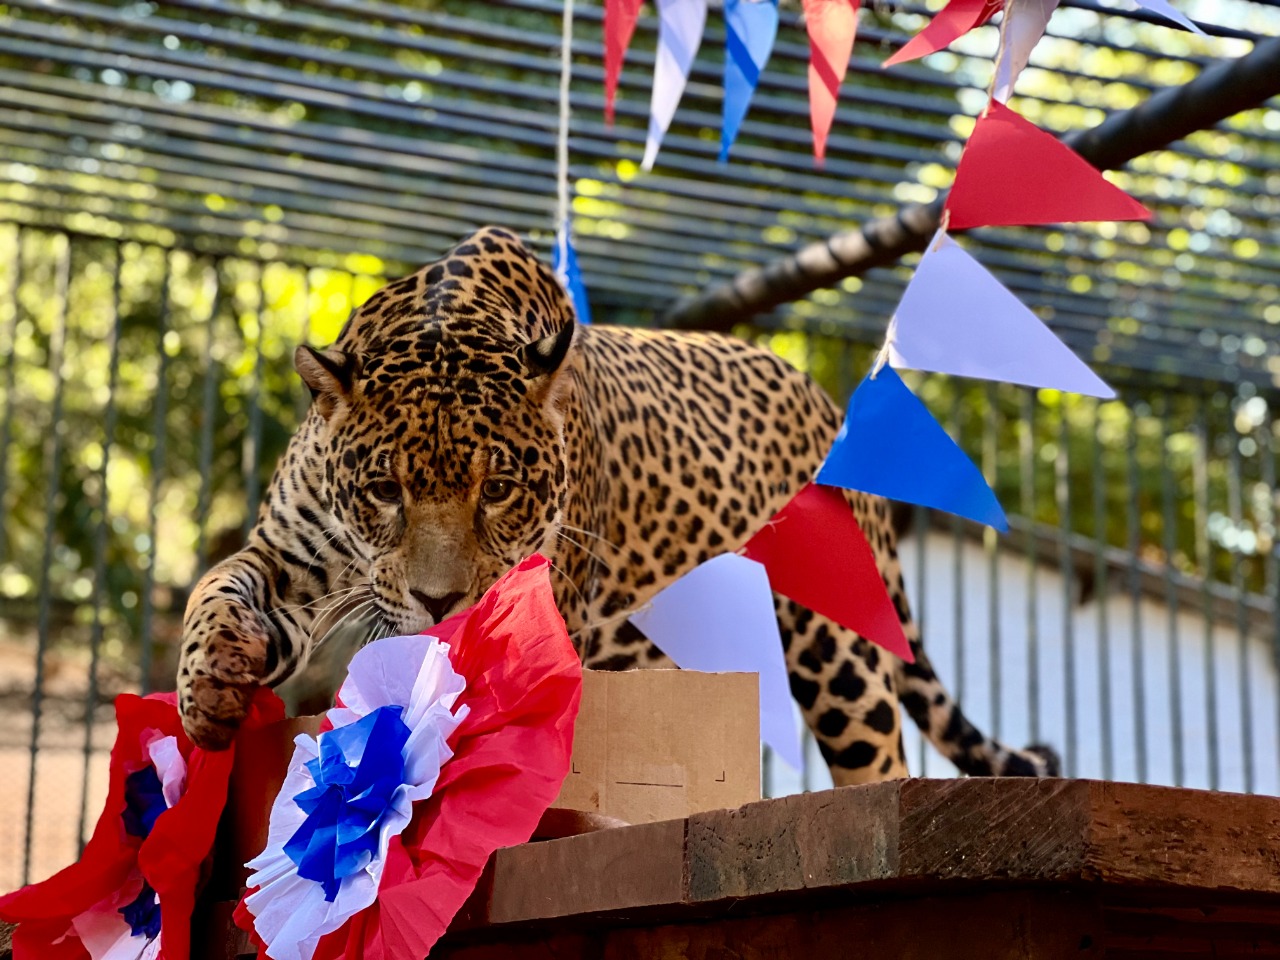 Animals from the ITAIPU Environmental Center savored a banquet for national celebrations